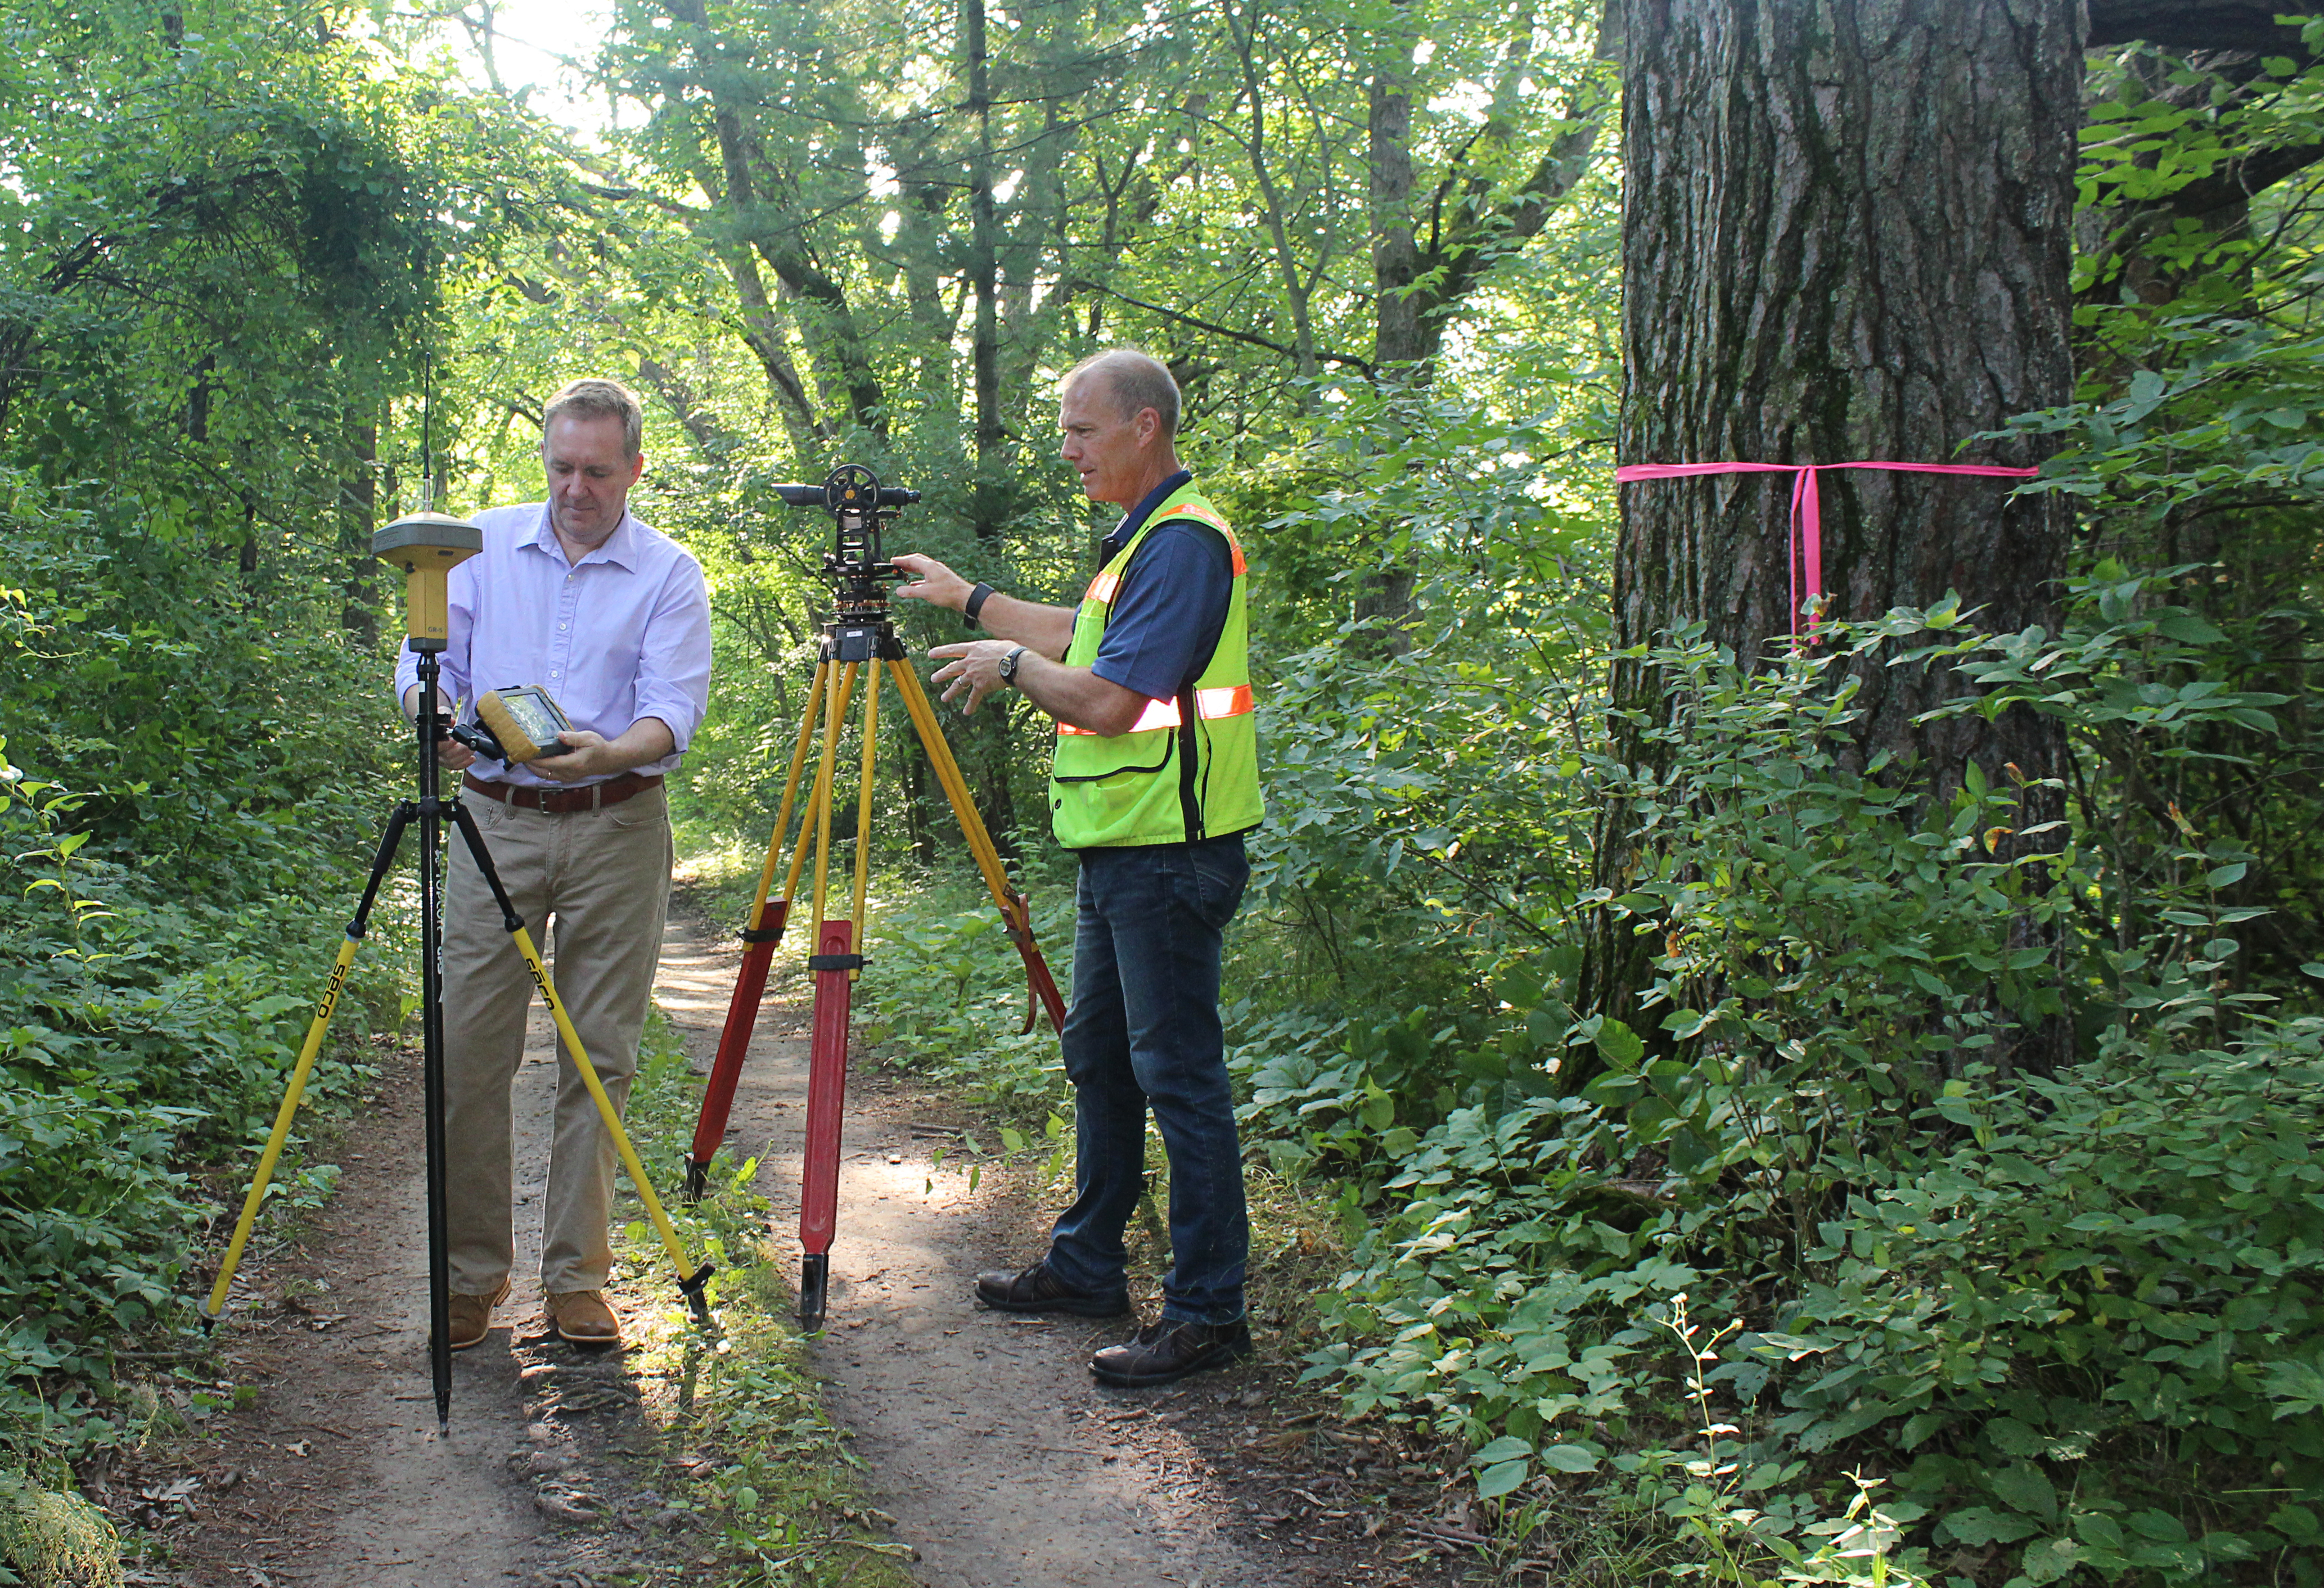 At a location in La Crosse County, state cartographer Howard Veregin, on left, stands next to a modern, GPS-assisted surveying instrument. On right, Bryan Meyers, La Crosse County Surveyor and president of the Wisconsin County Surveyors Association, stands with a transit like the one likely used to survey this site. 
